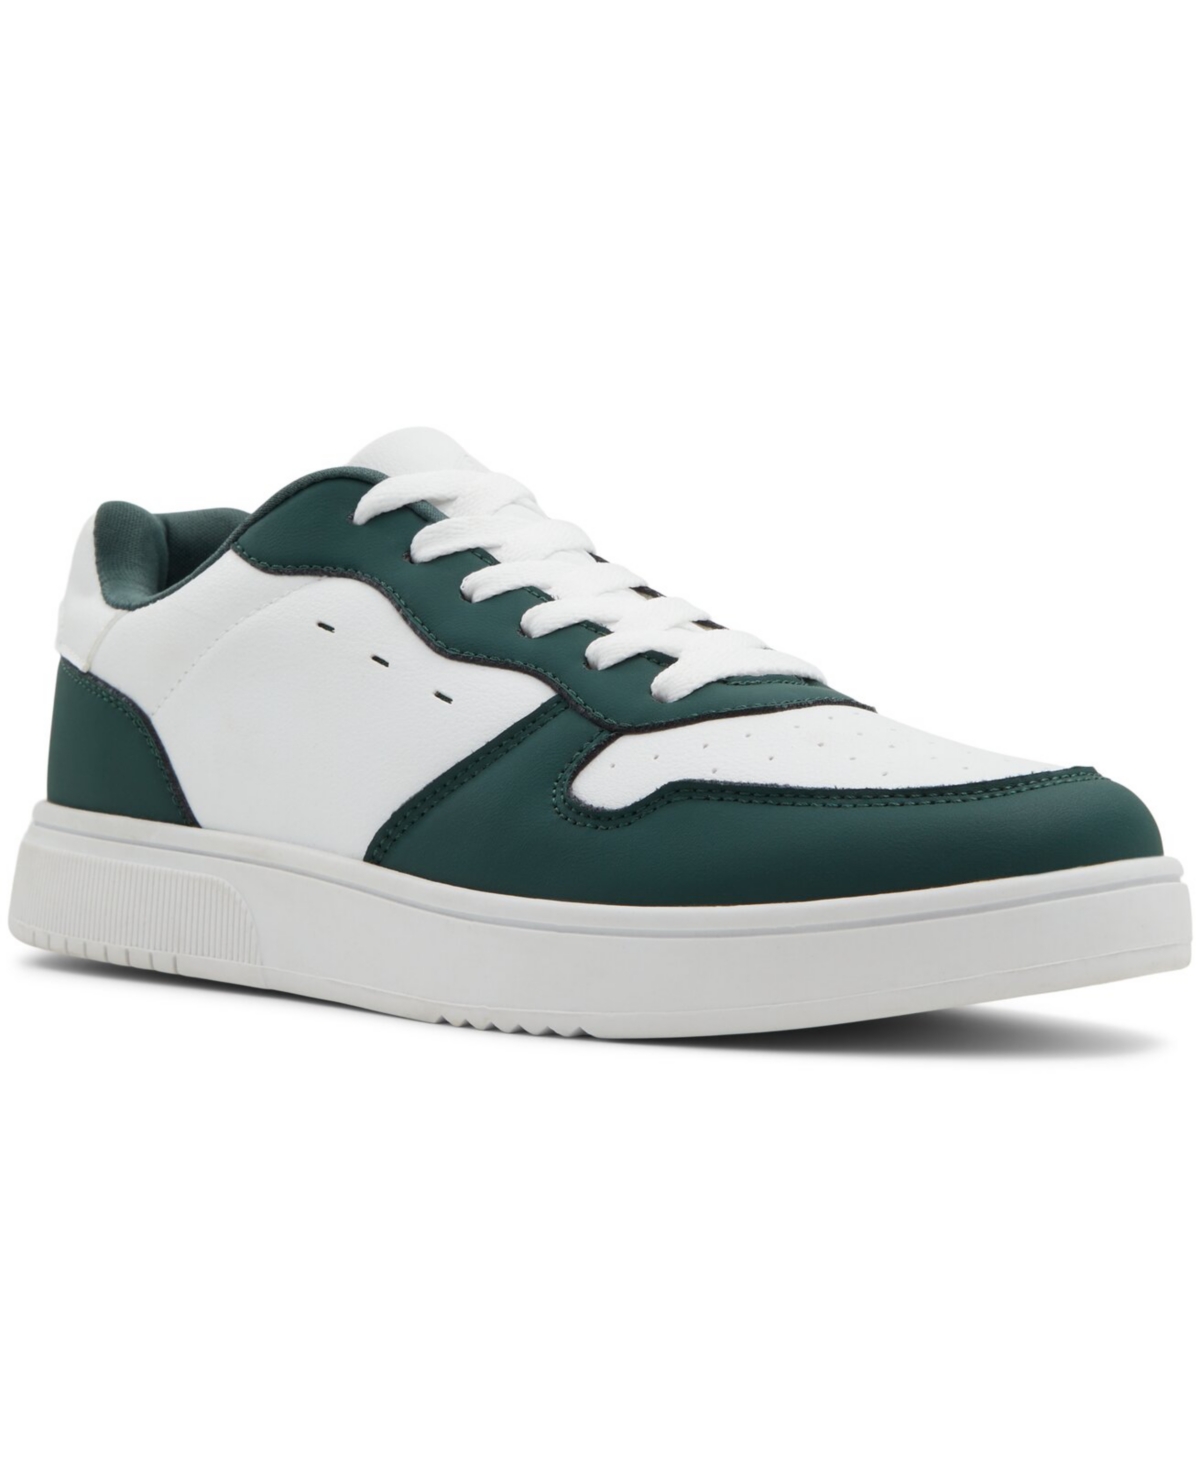 Call It Spring Men's Milanno Fashion Athletics Sneakers In Green